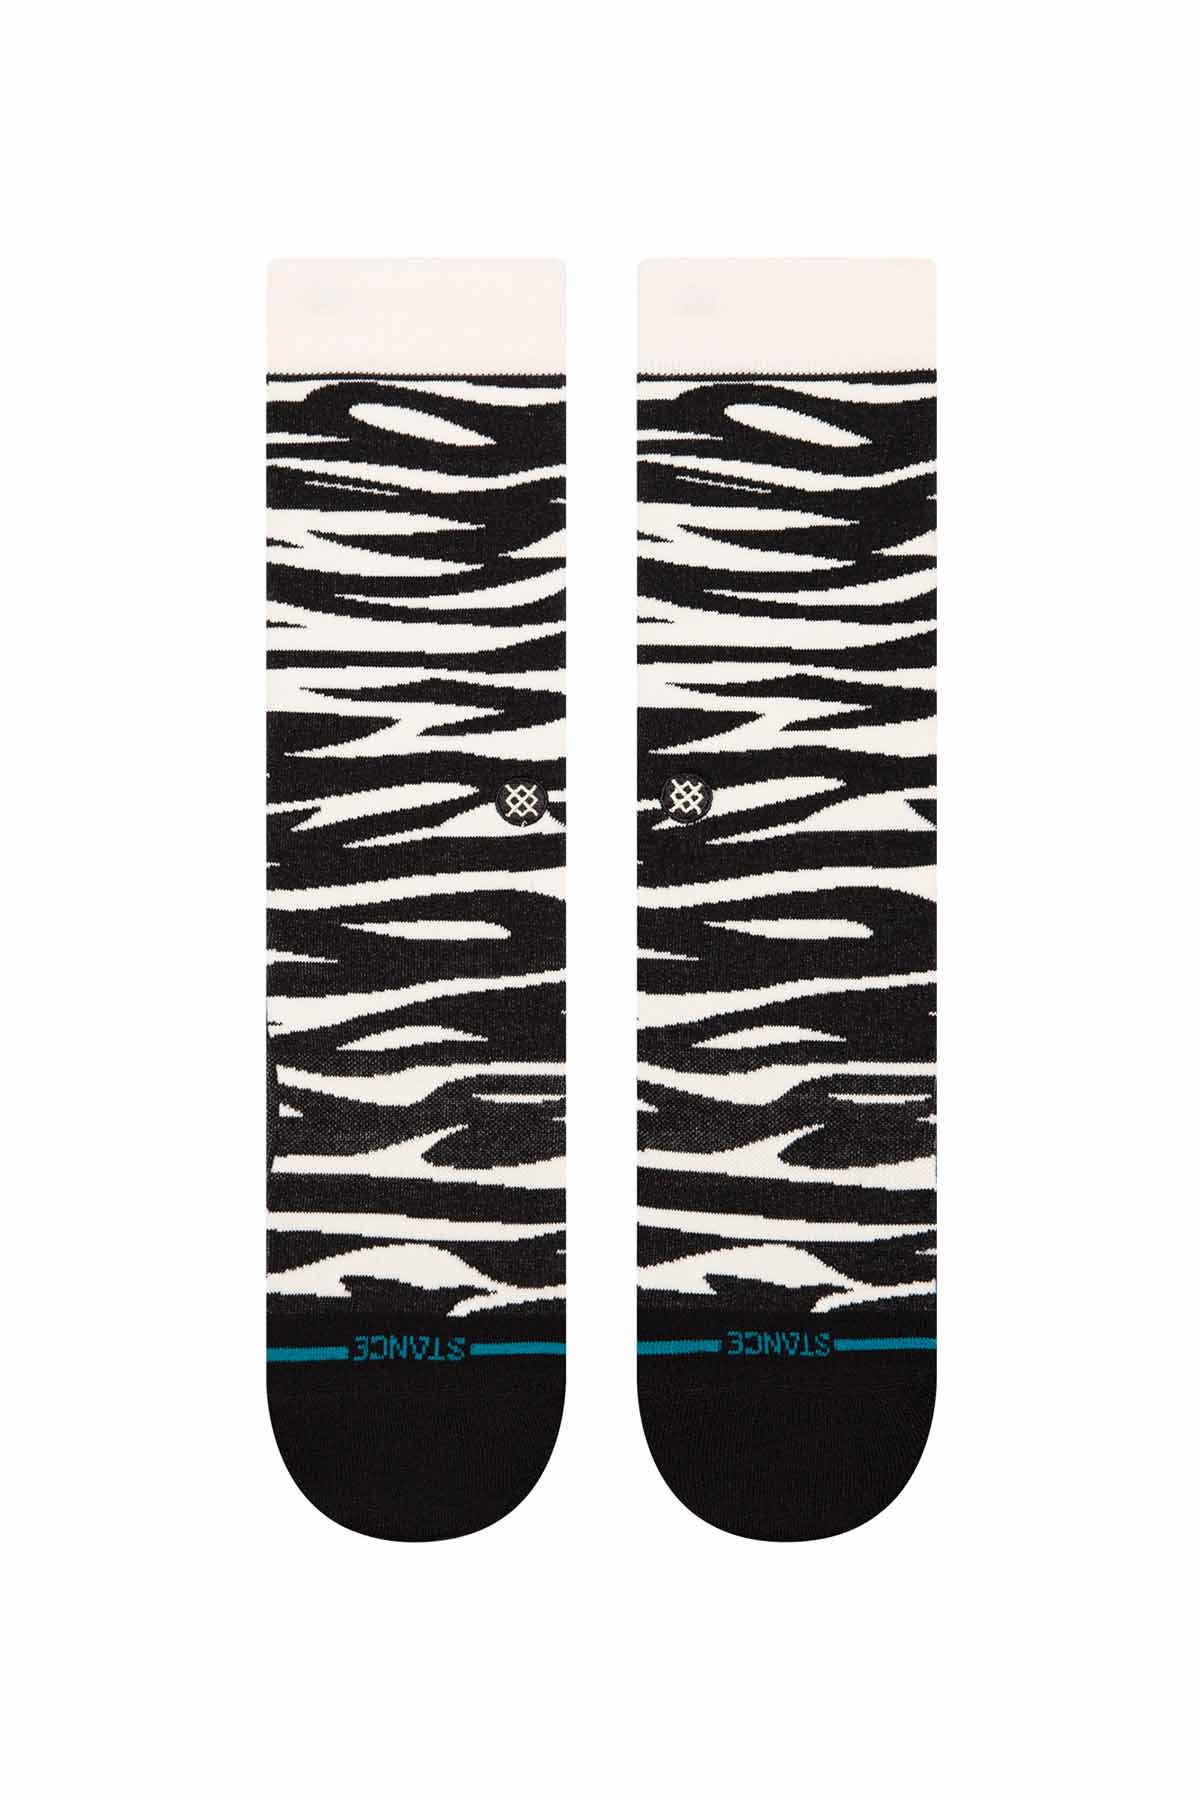 Stance - Spike - Black White - Front